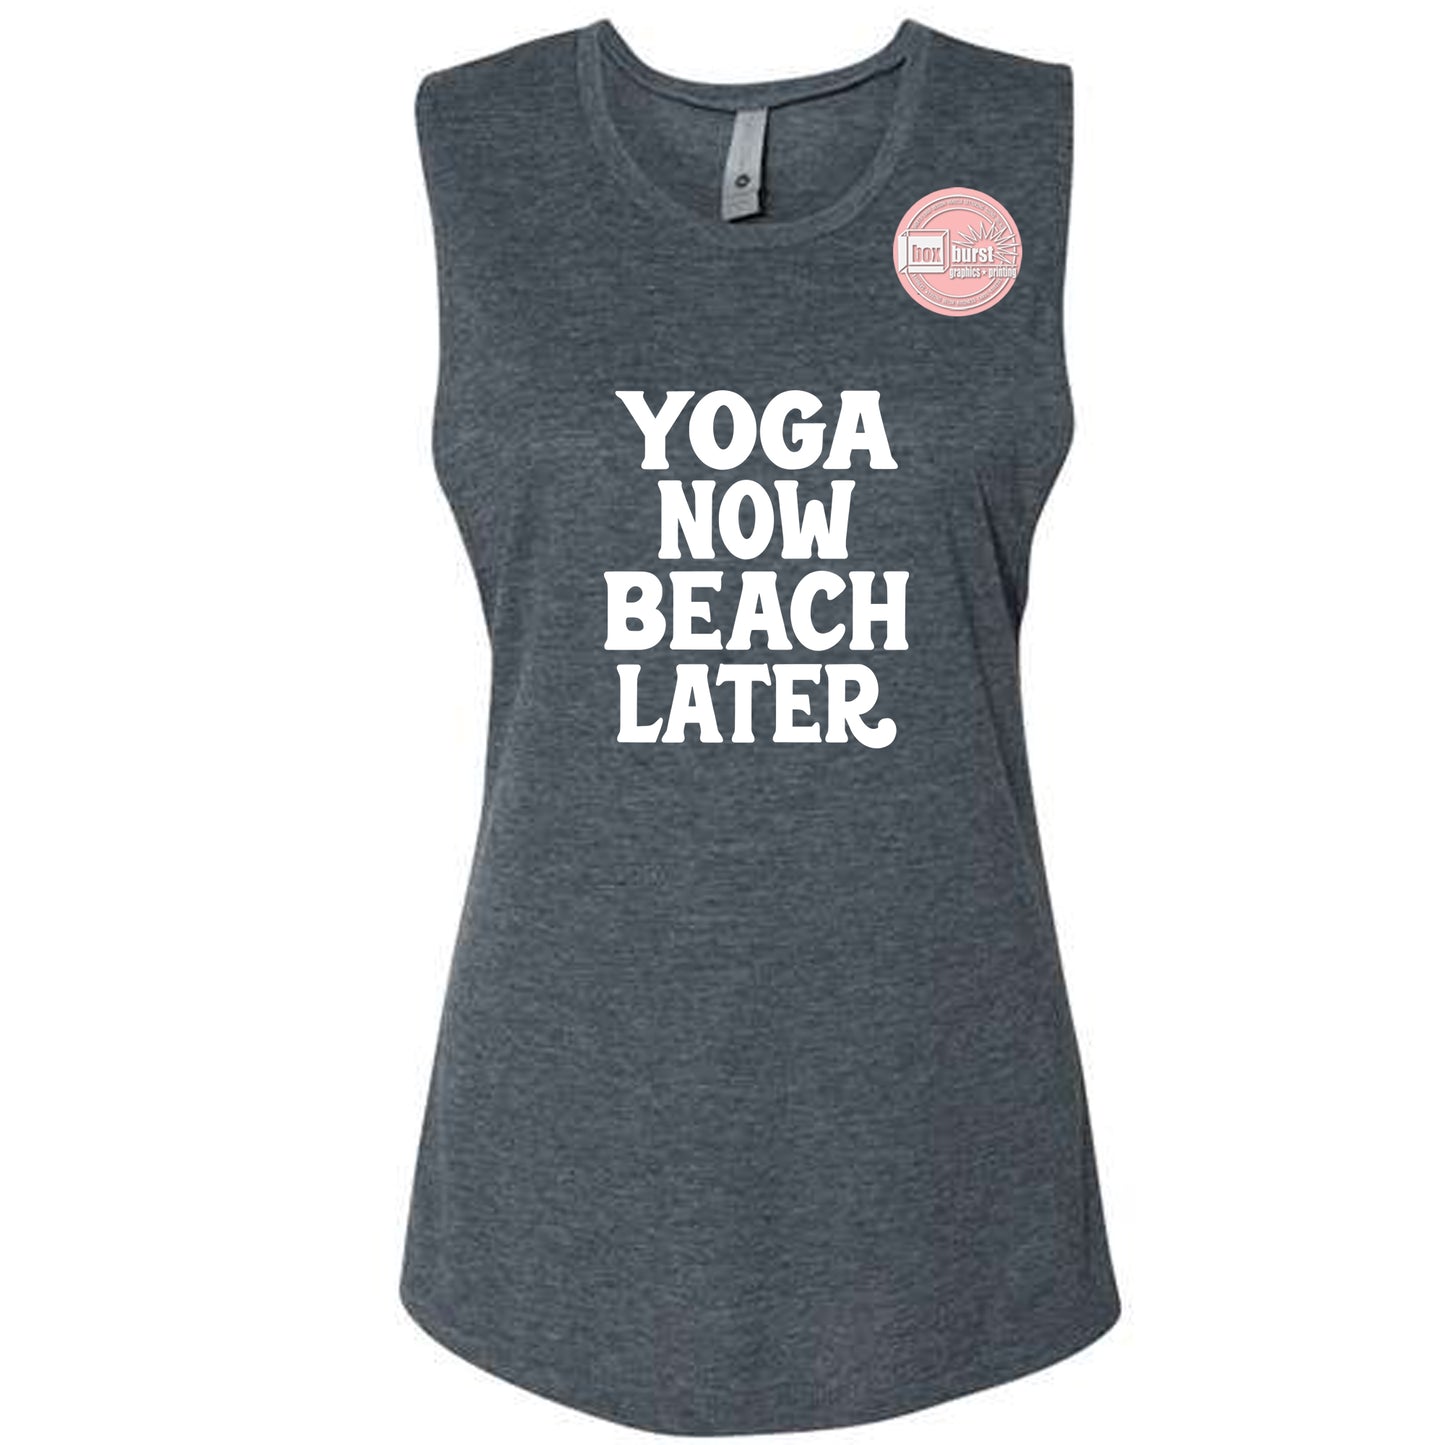 Yoga Now Beach Later women's muscle tank